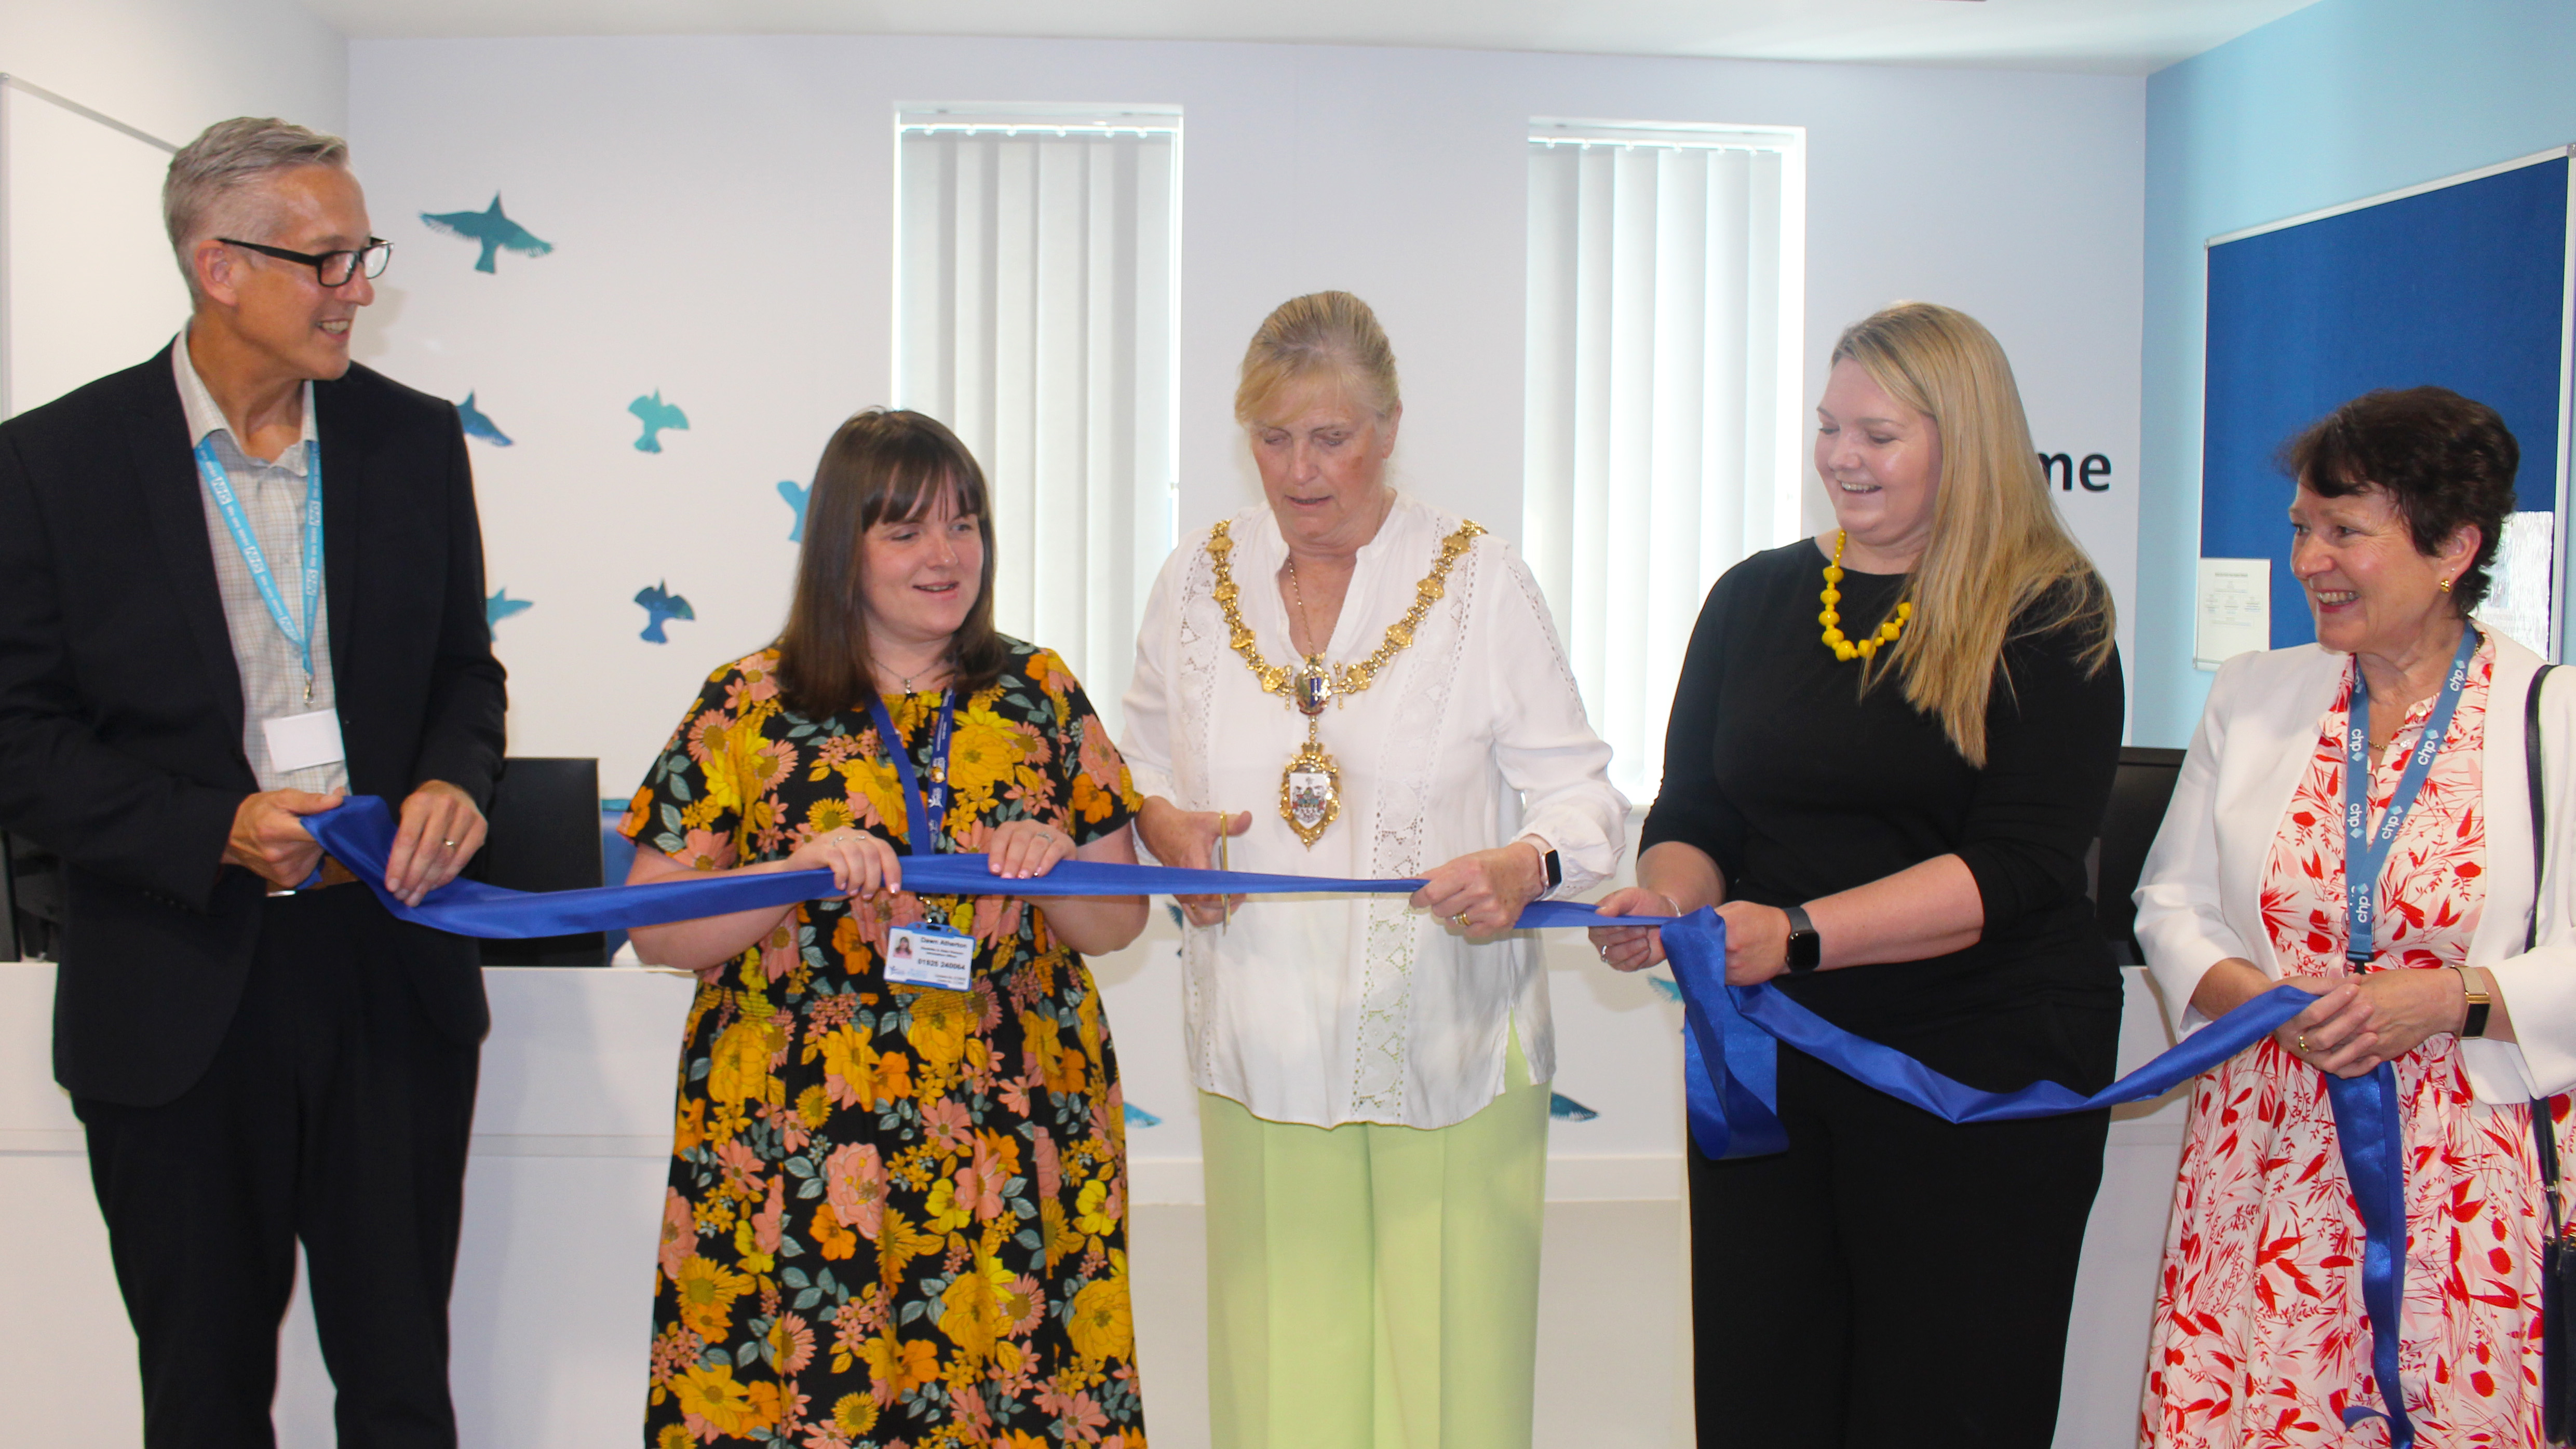 Simon Constable, Dawn Atherton, Mayor of Warrington Cllr Jean Flaherty, Sarah Beaumont-Smith and Wendy Farrington-Chadd at the ribbon cutting in the waiting area of the Breast Screening Clinic at Bath Street